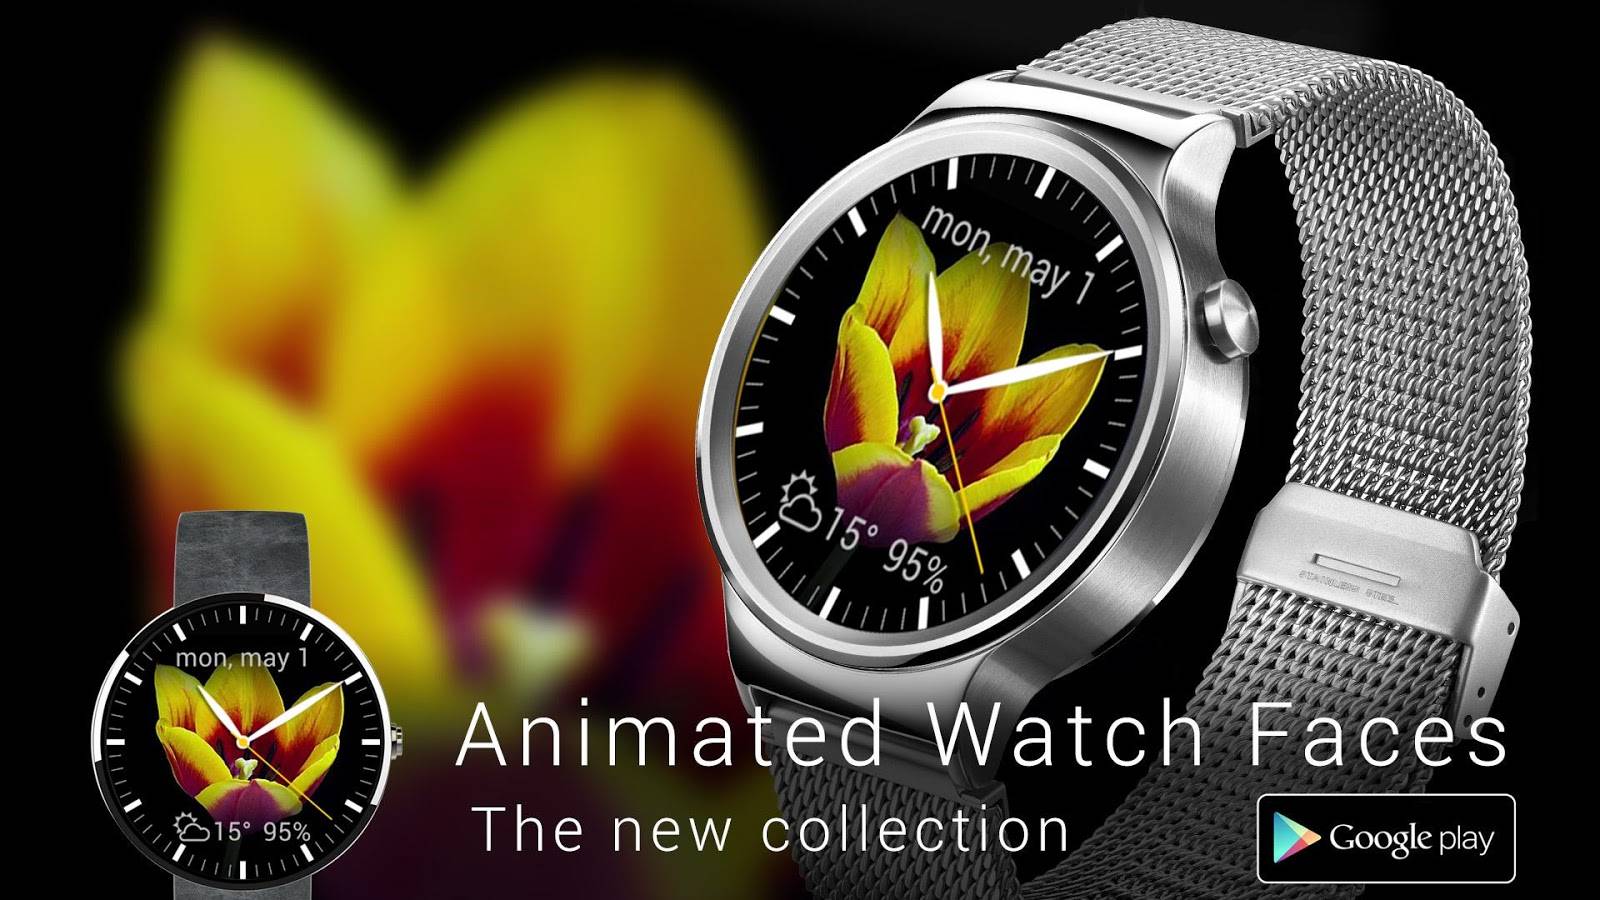 See your smartwatch “move” with Animated watch faces app - Android Community